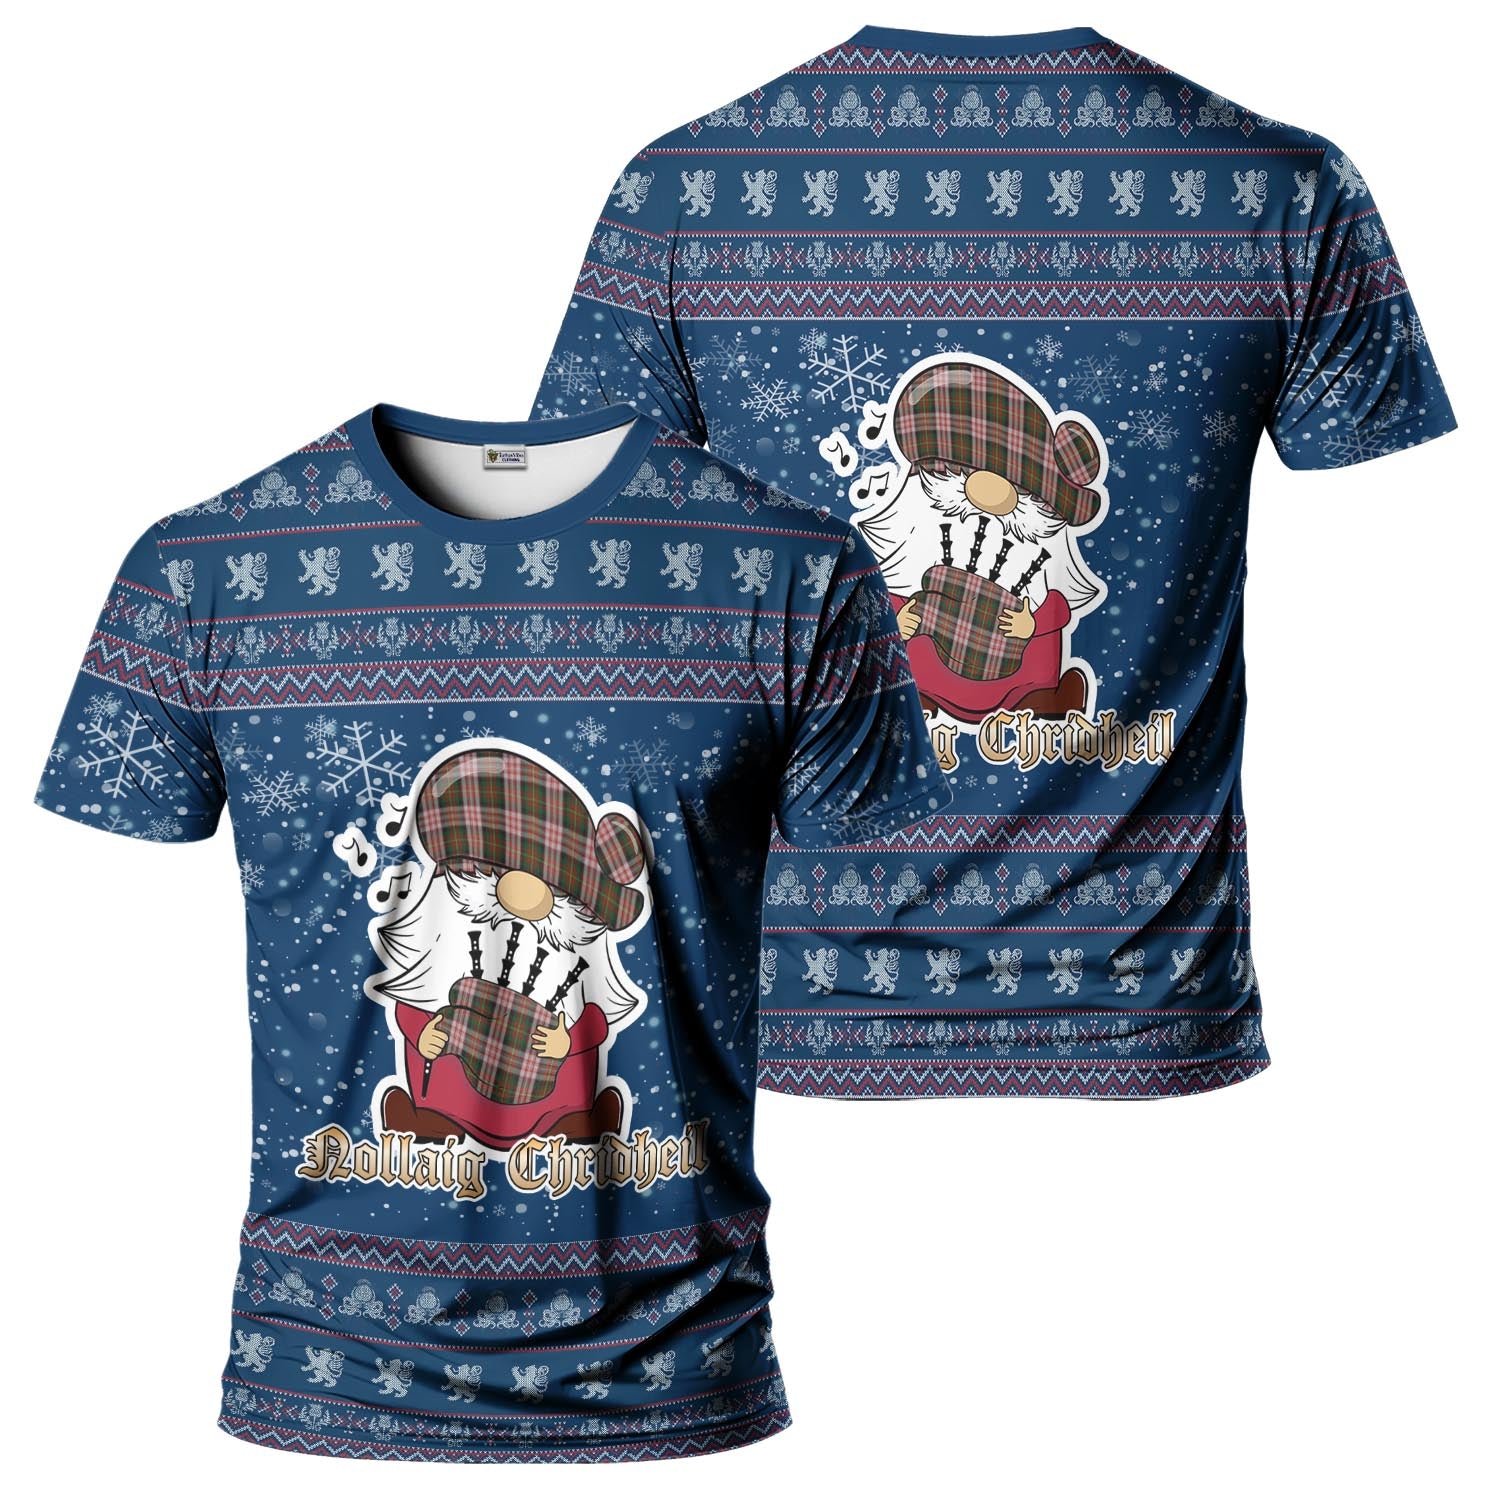 Carnegie Dress Clan Christmas Family T-Shirt with Funny Gnome Playing Bagpipes Kid's Shirt Blue - Tartanvibesclothing